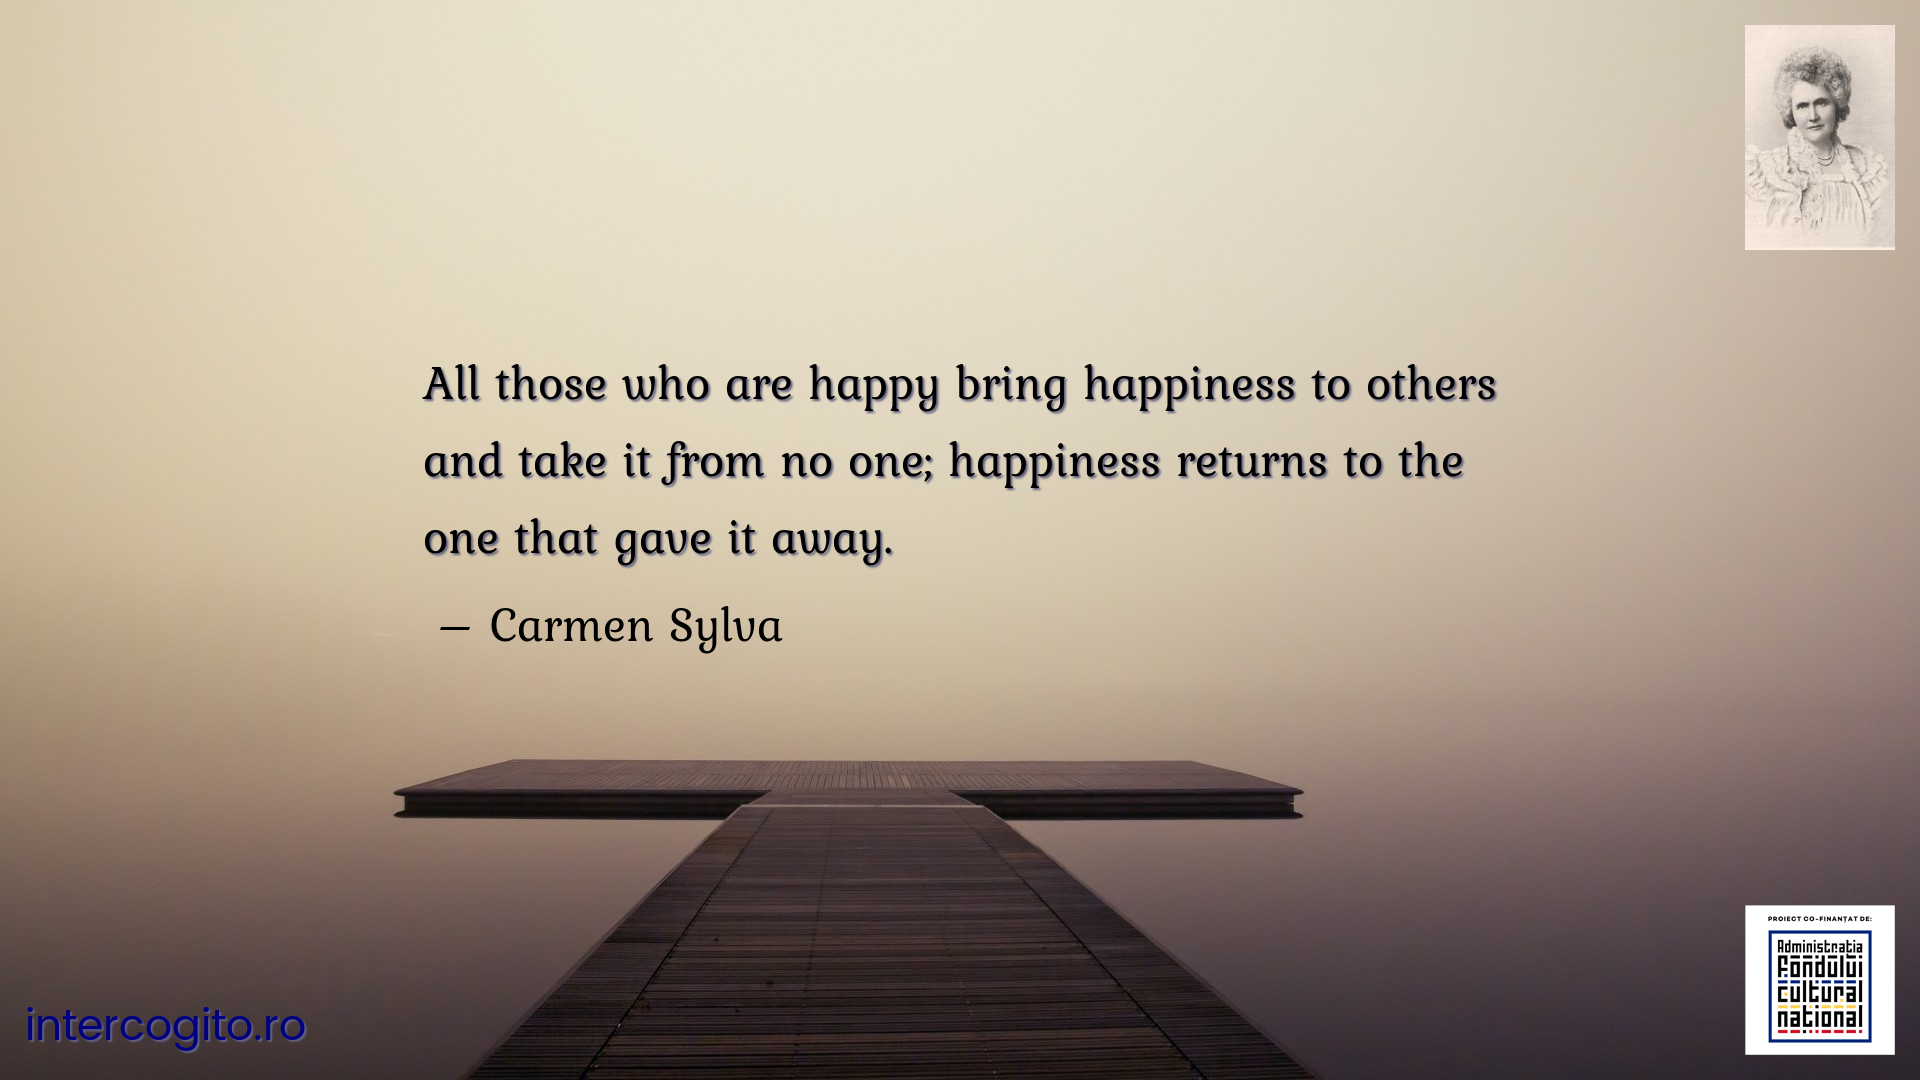 All those who are happy bring happiness to others and take it from no one; happiness returns to the one that gave it away.